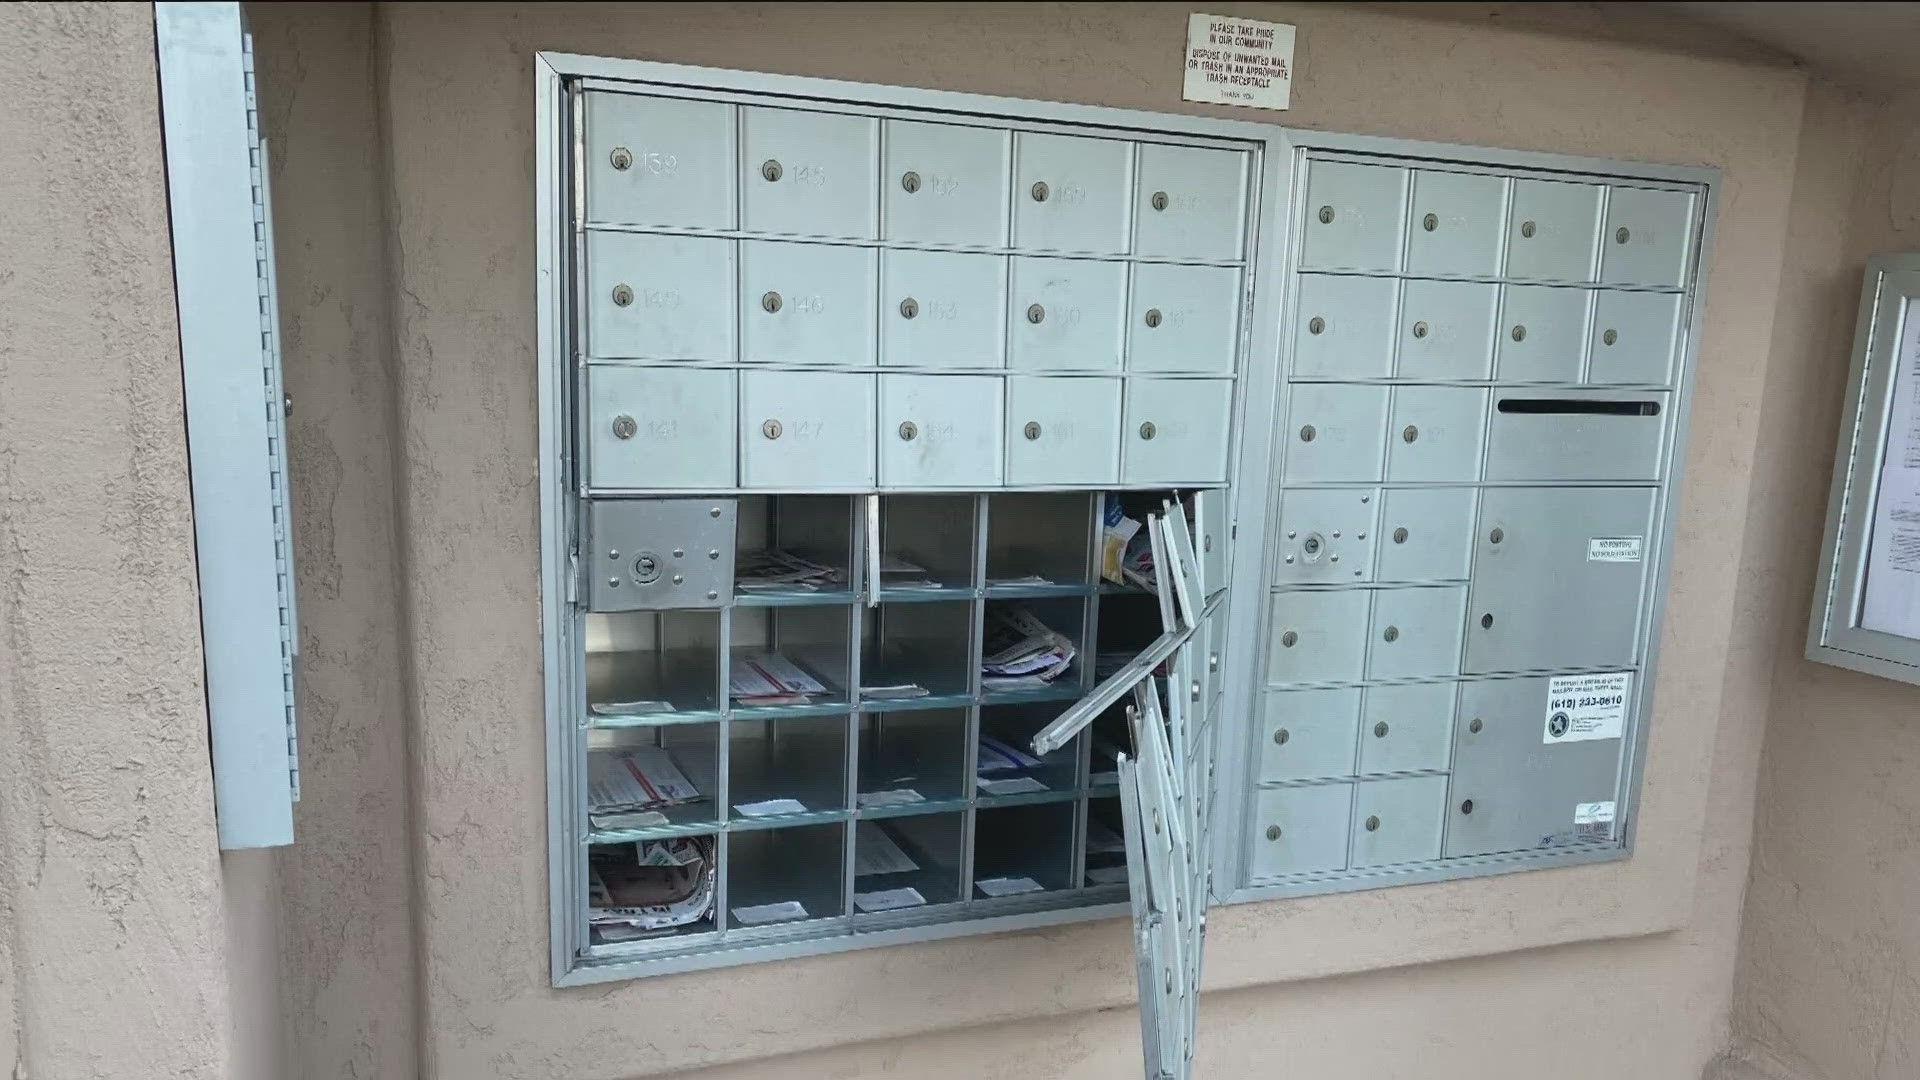 Delivery stopped because of a broken mail receptacle unit and residents say the management company is ignoring their requests to repair it.